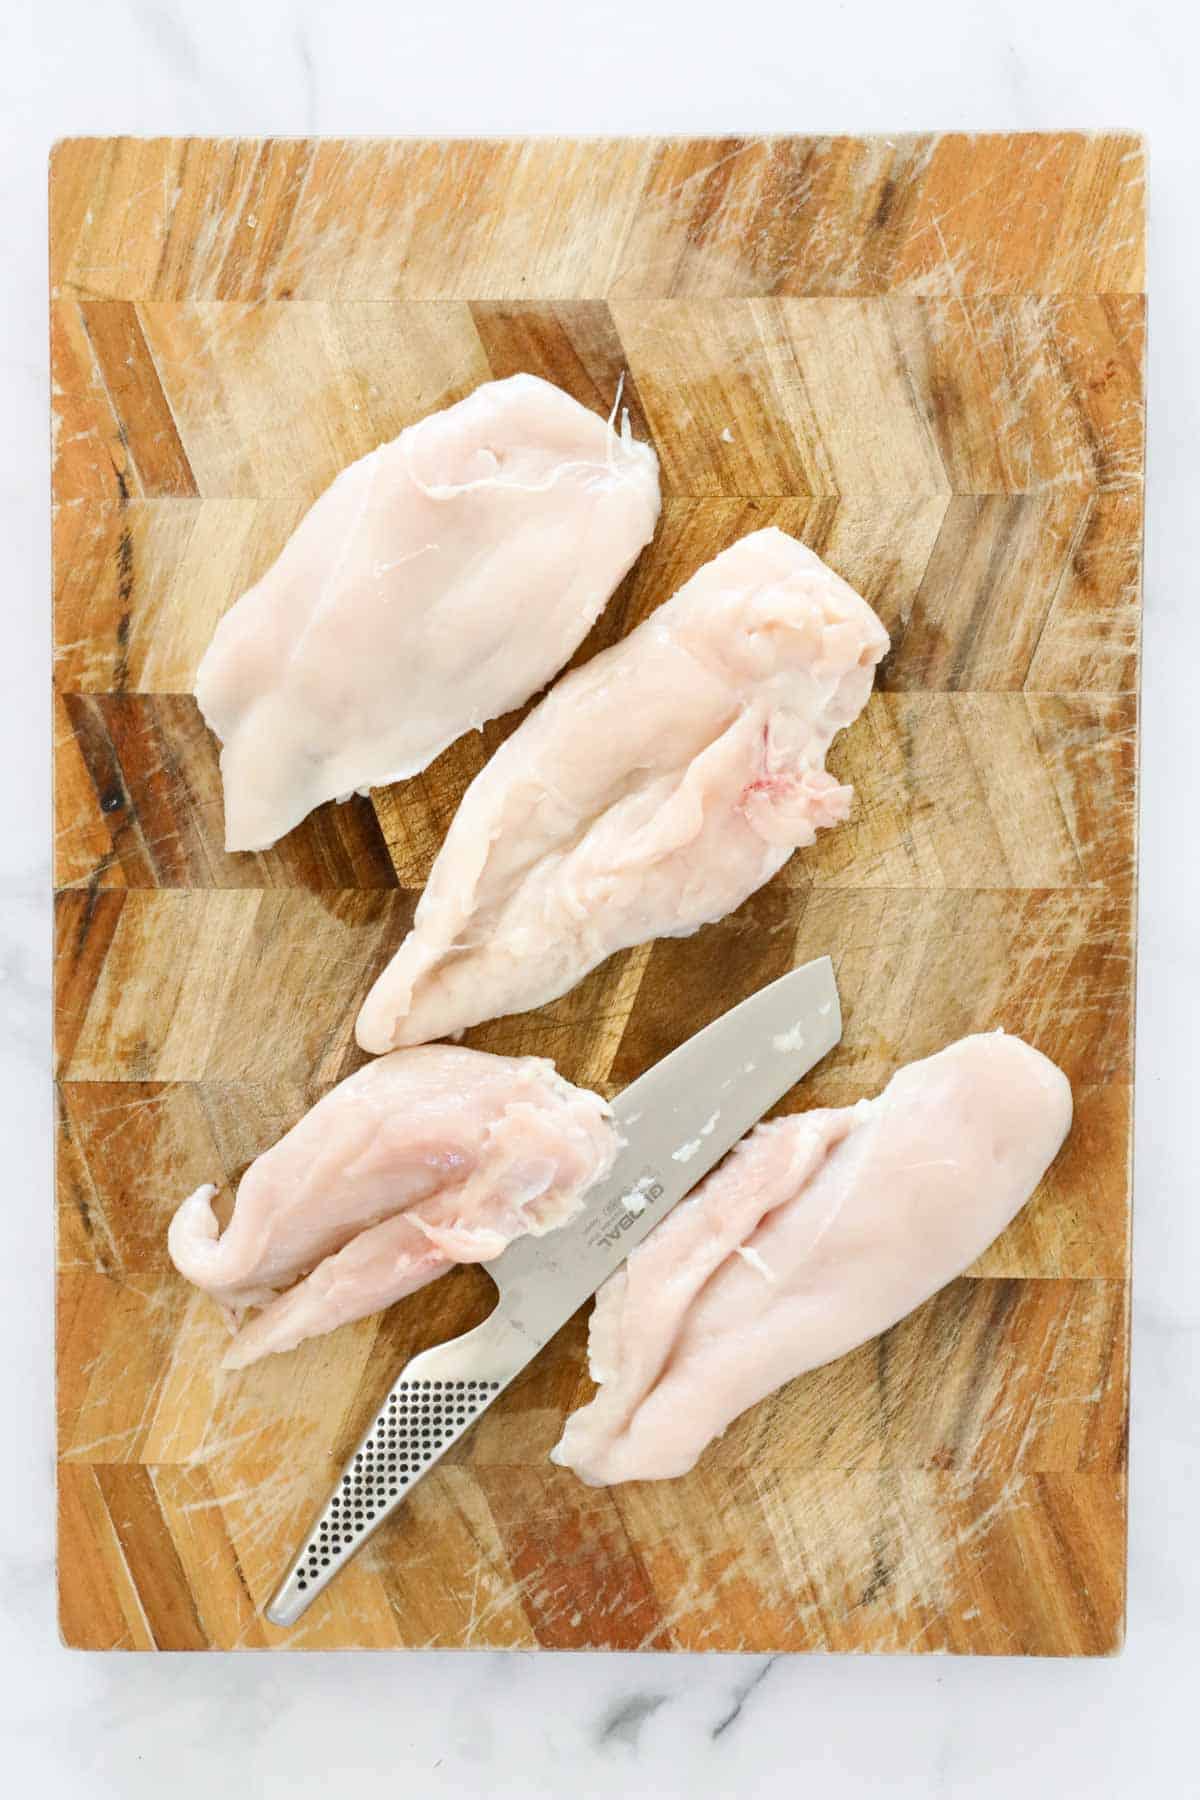 Raw pieces of chicken breast on a cutting board.